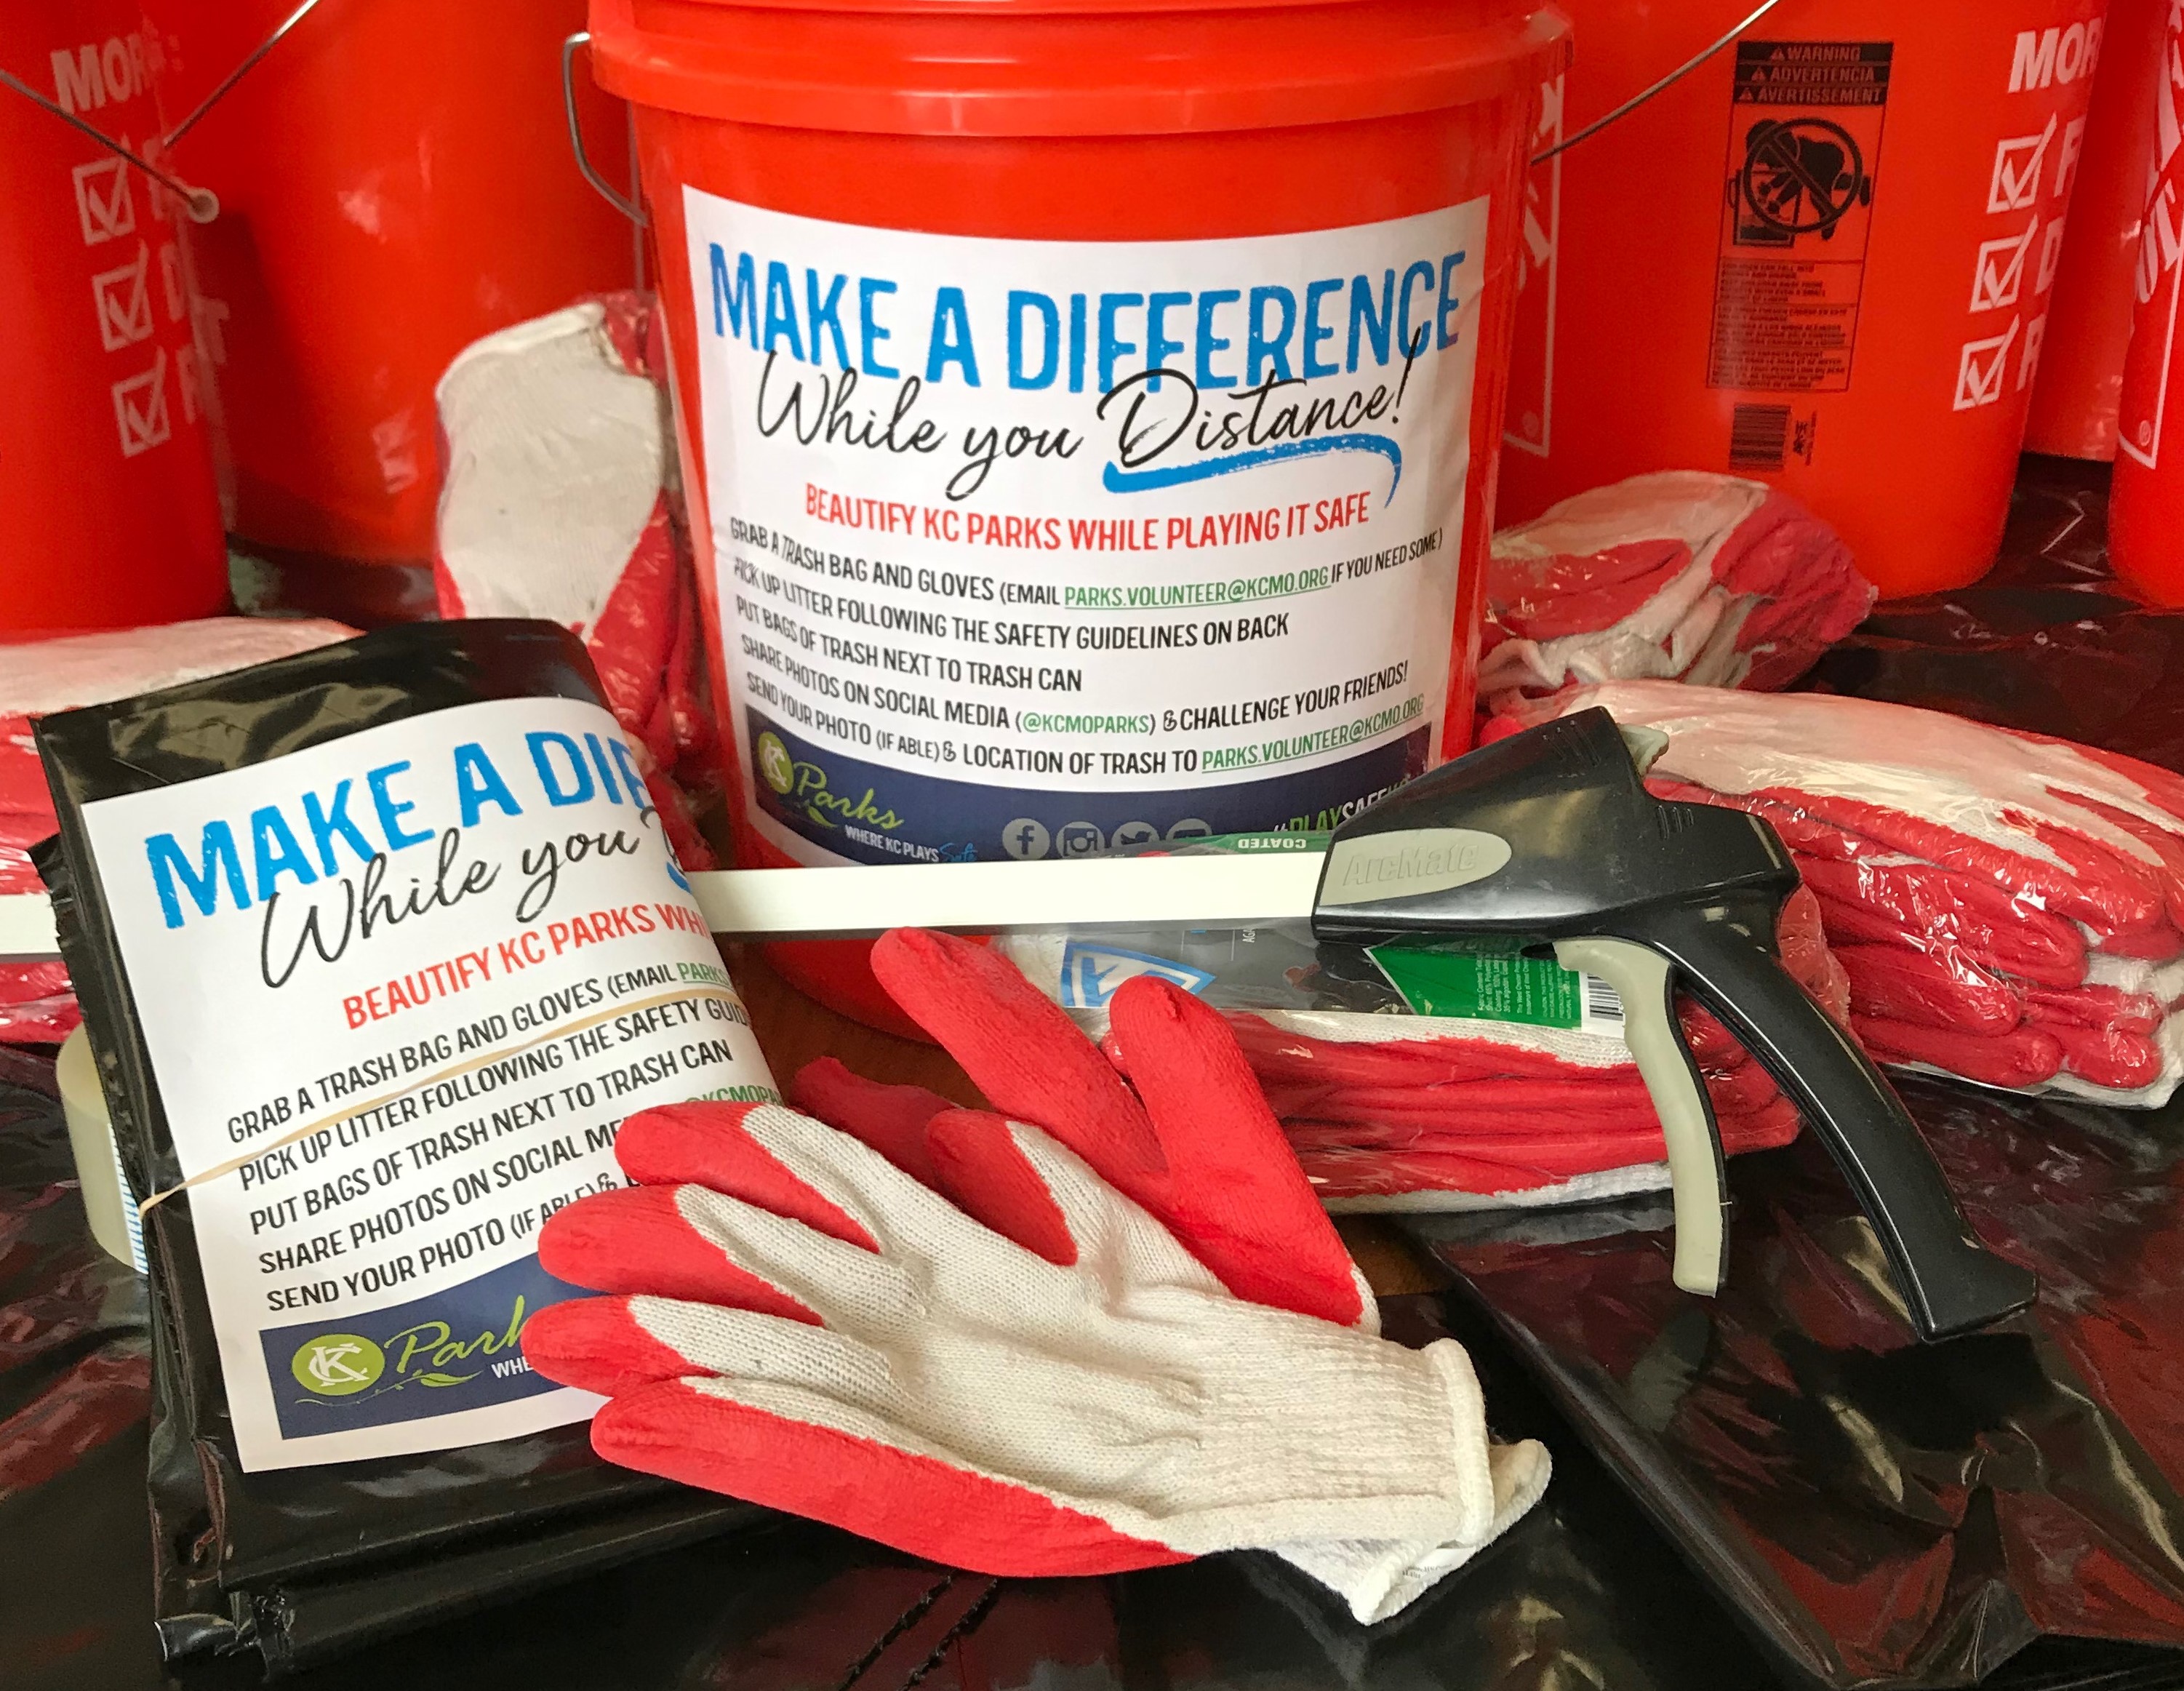 Make a difference Trash pickup supplies and buckets